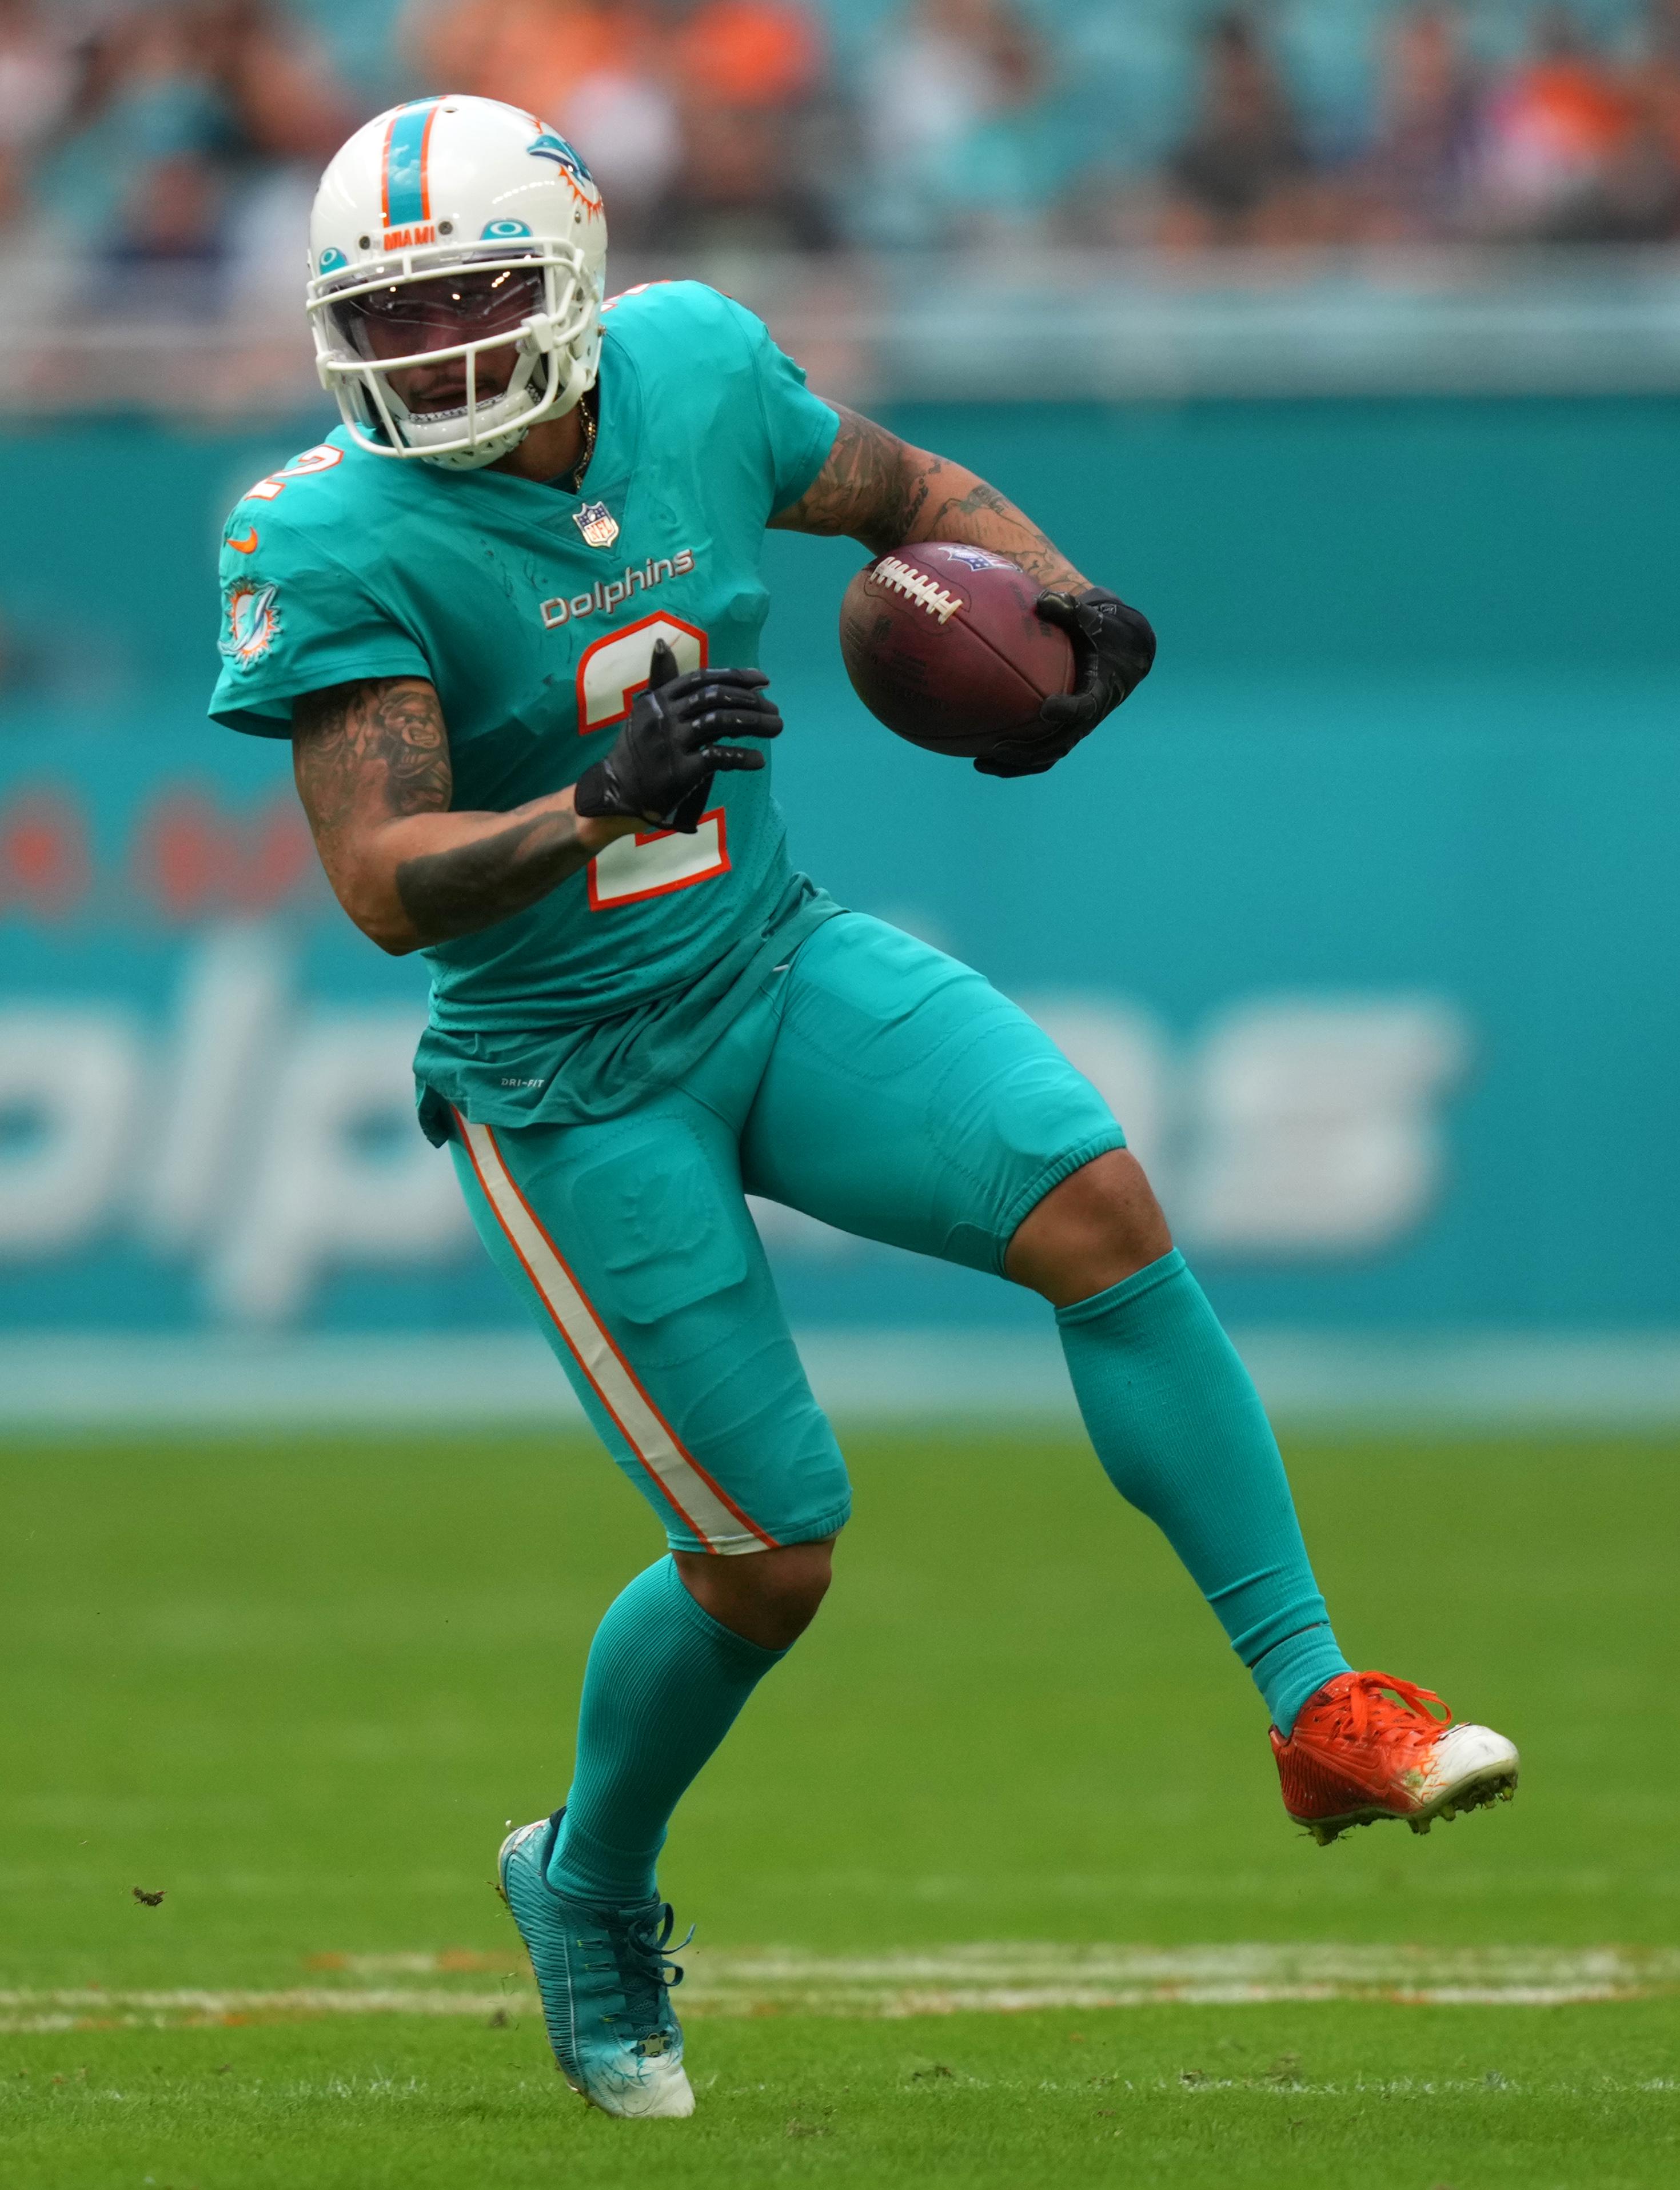 Albert Wilson Reveals Shocking Details About Dolphins Toxic Environment in 2021